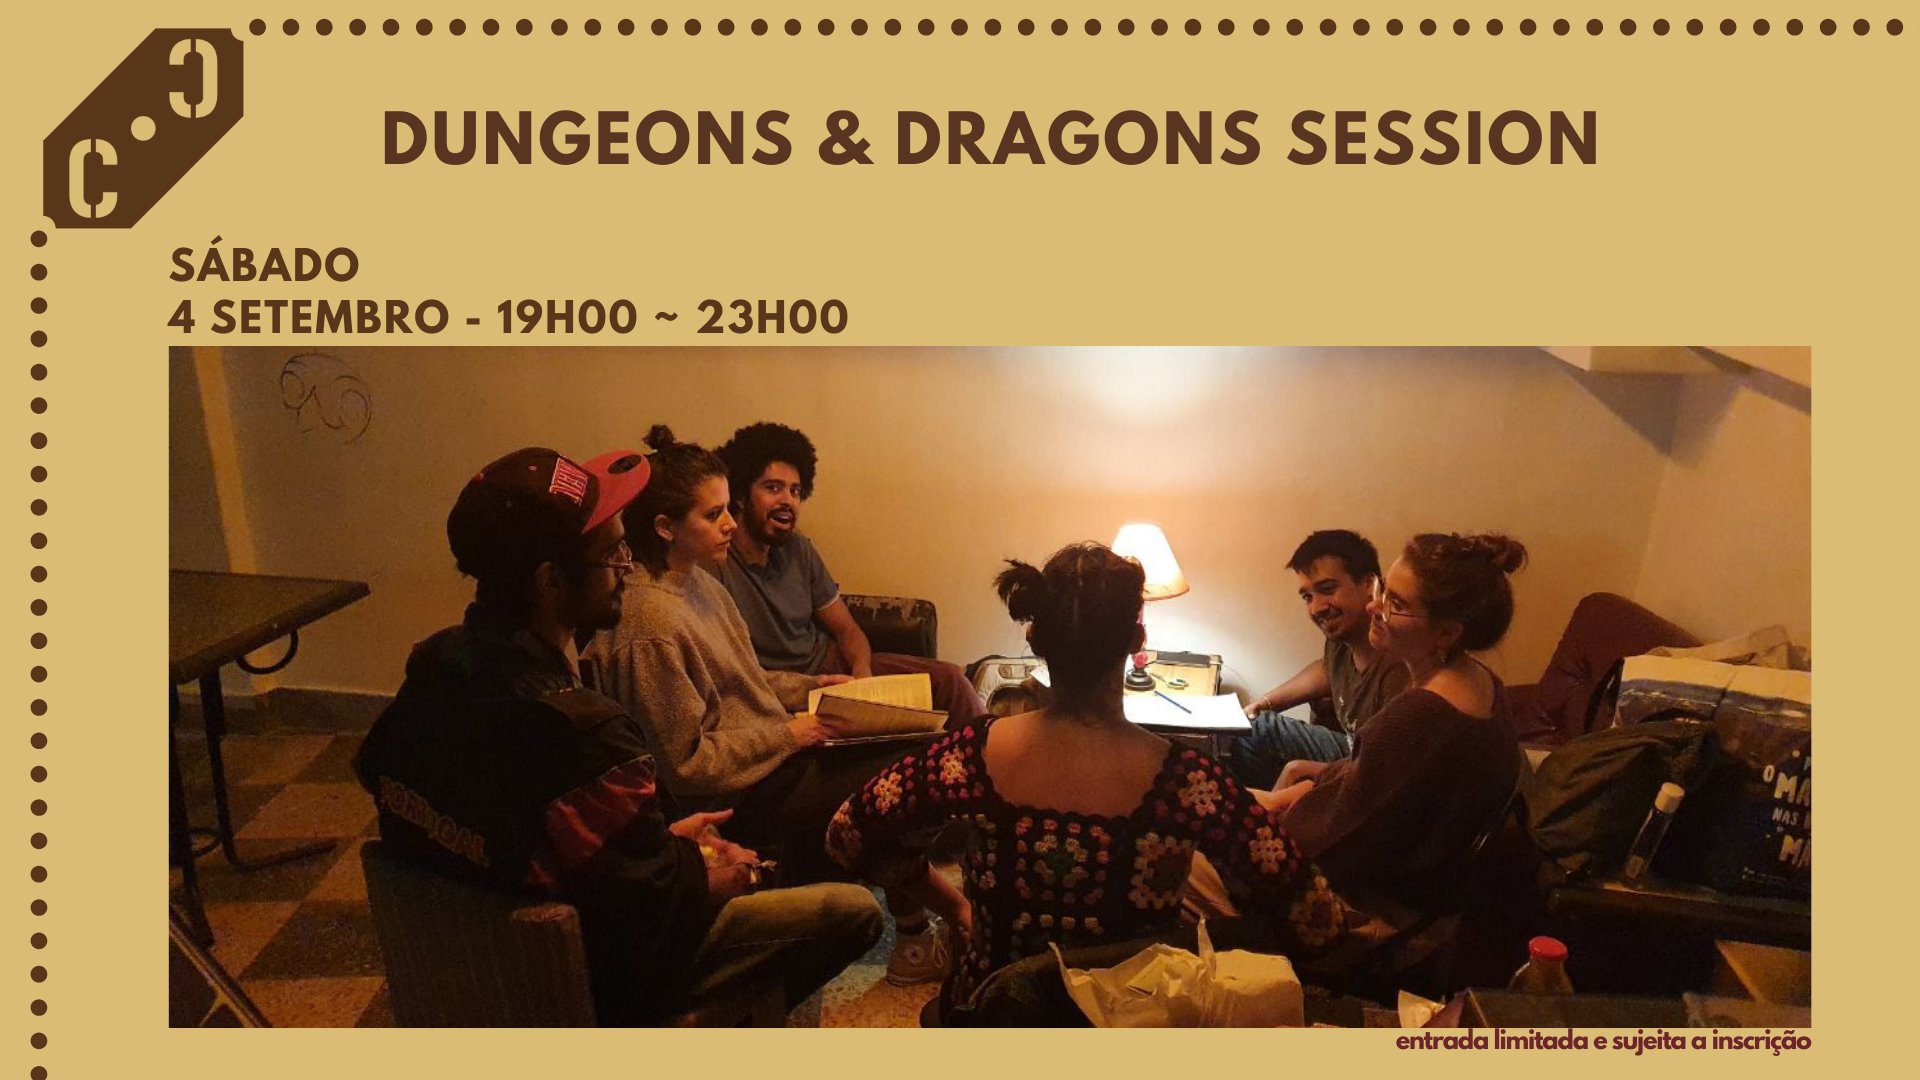 Dungeons & Dragons Session